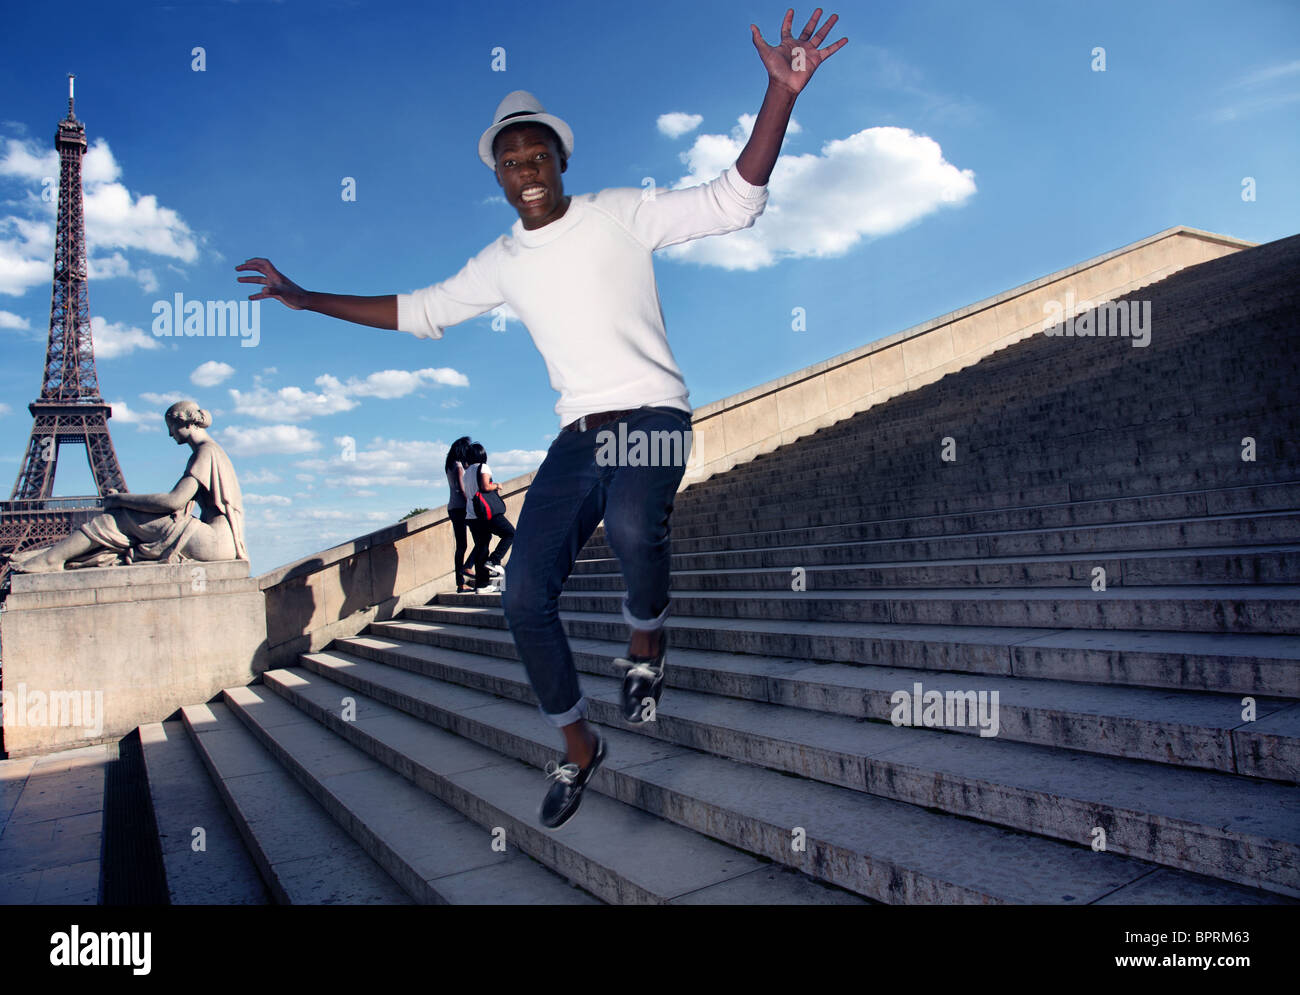 Man falling down the steps near the eiffel tower. Stock Photo